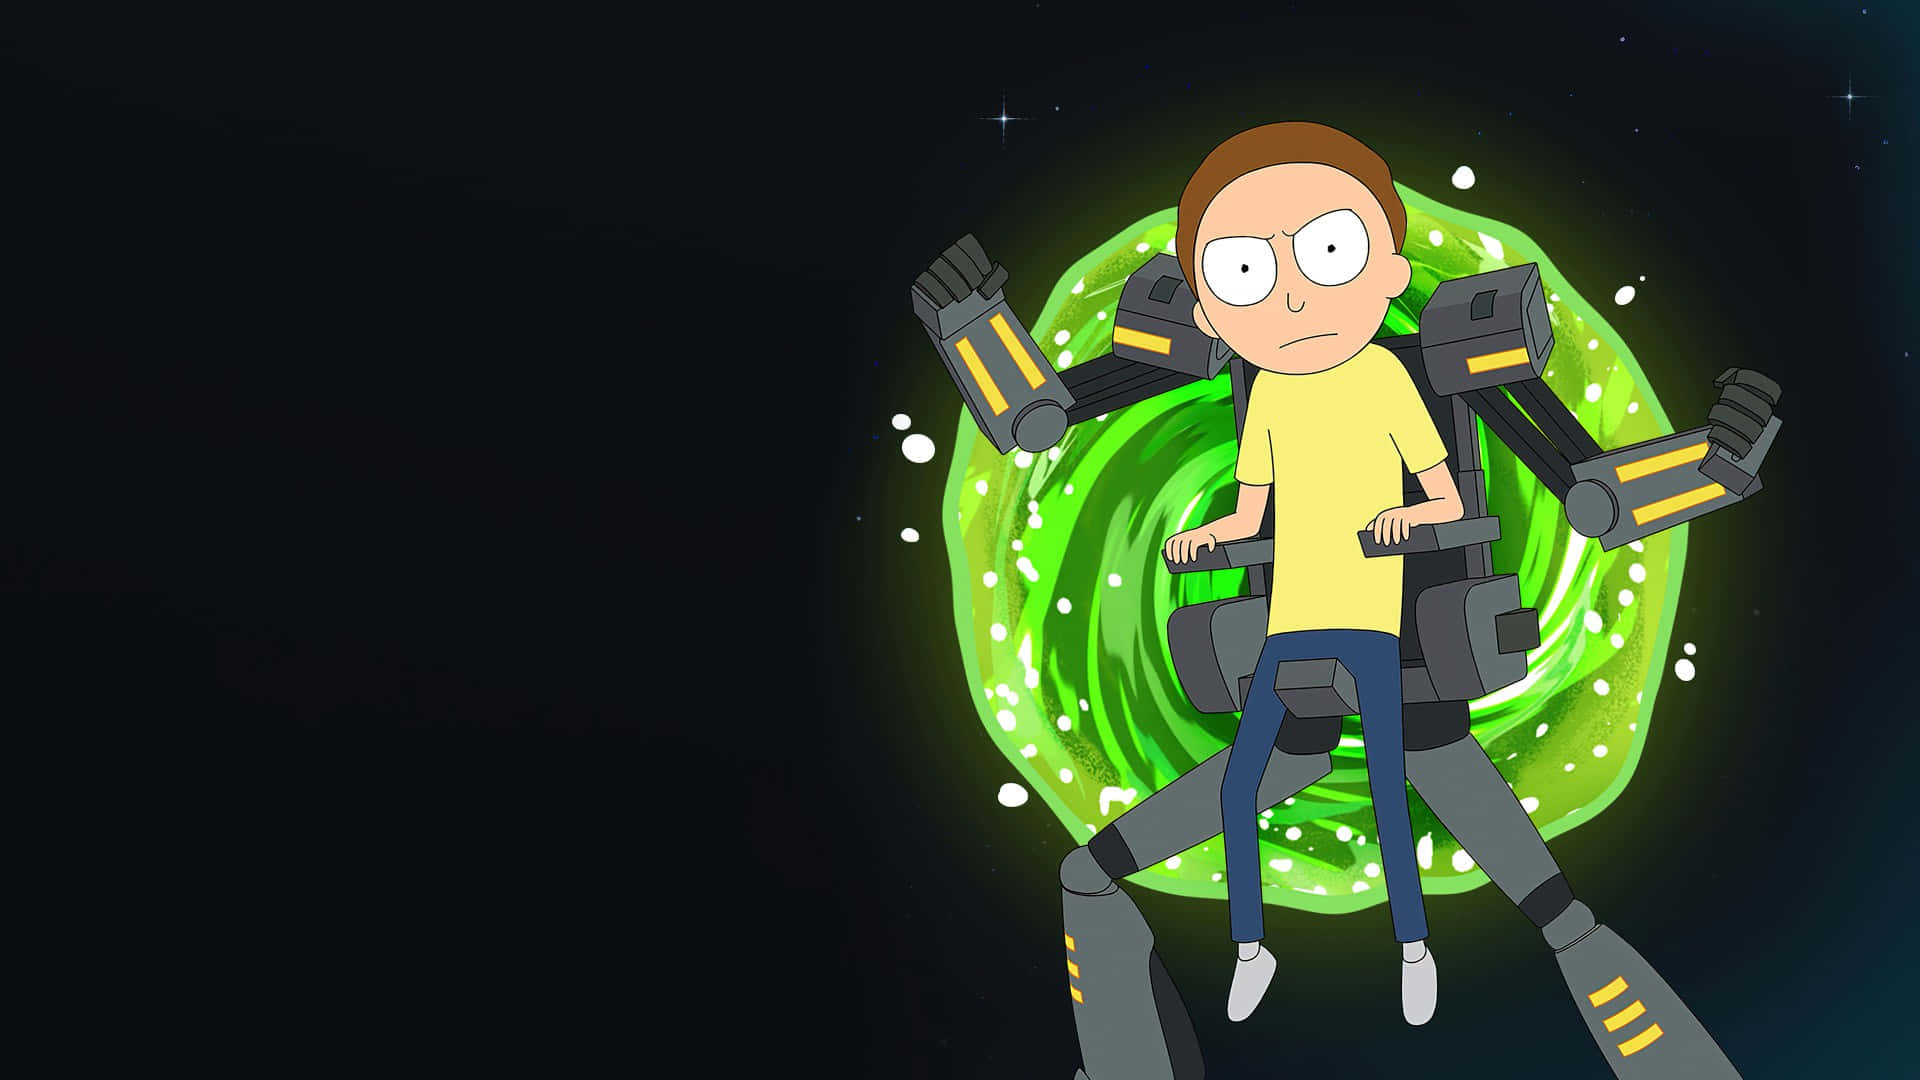 Take a tour of the universe with Rick and Morty Wallpaper